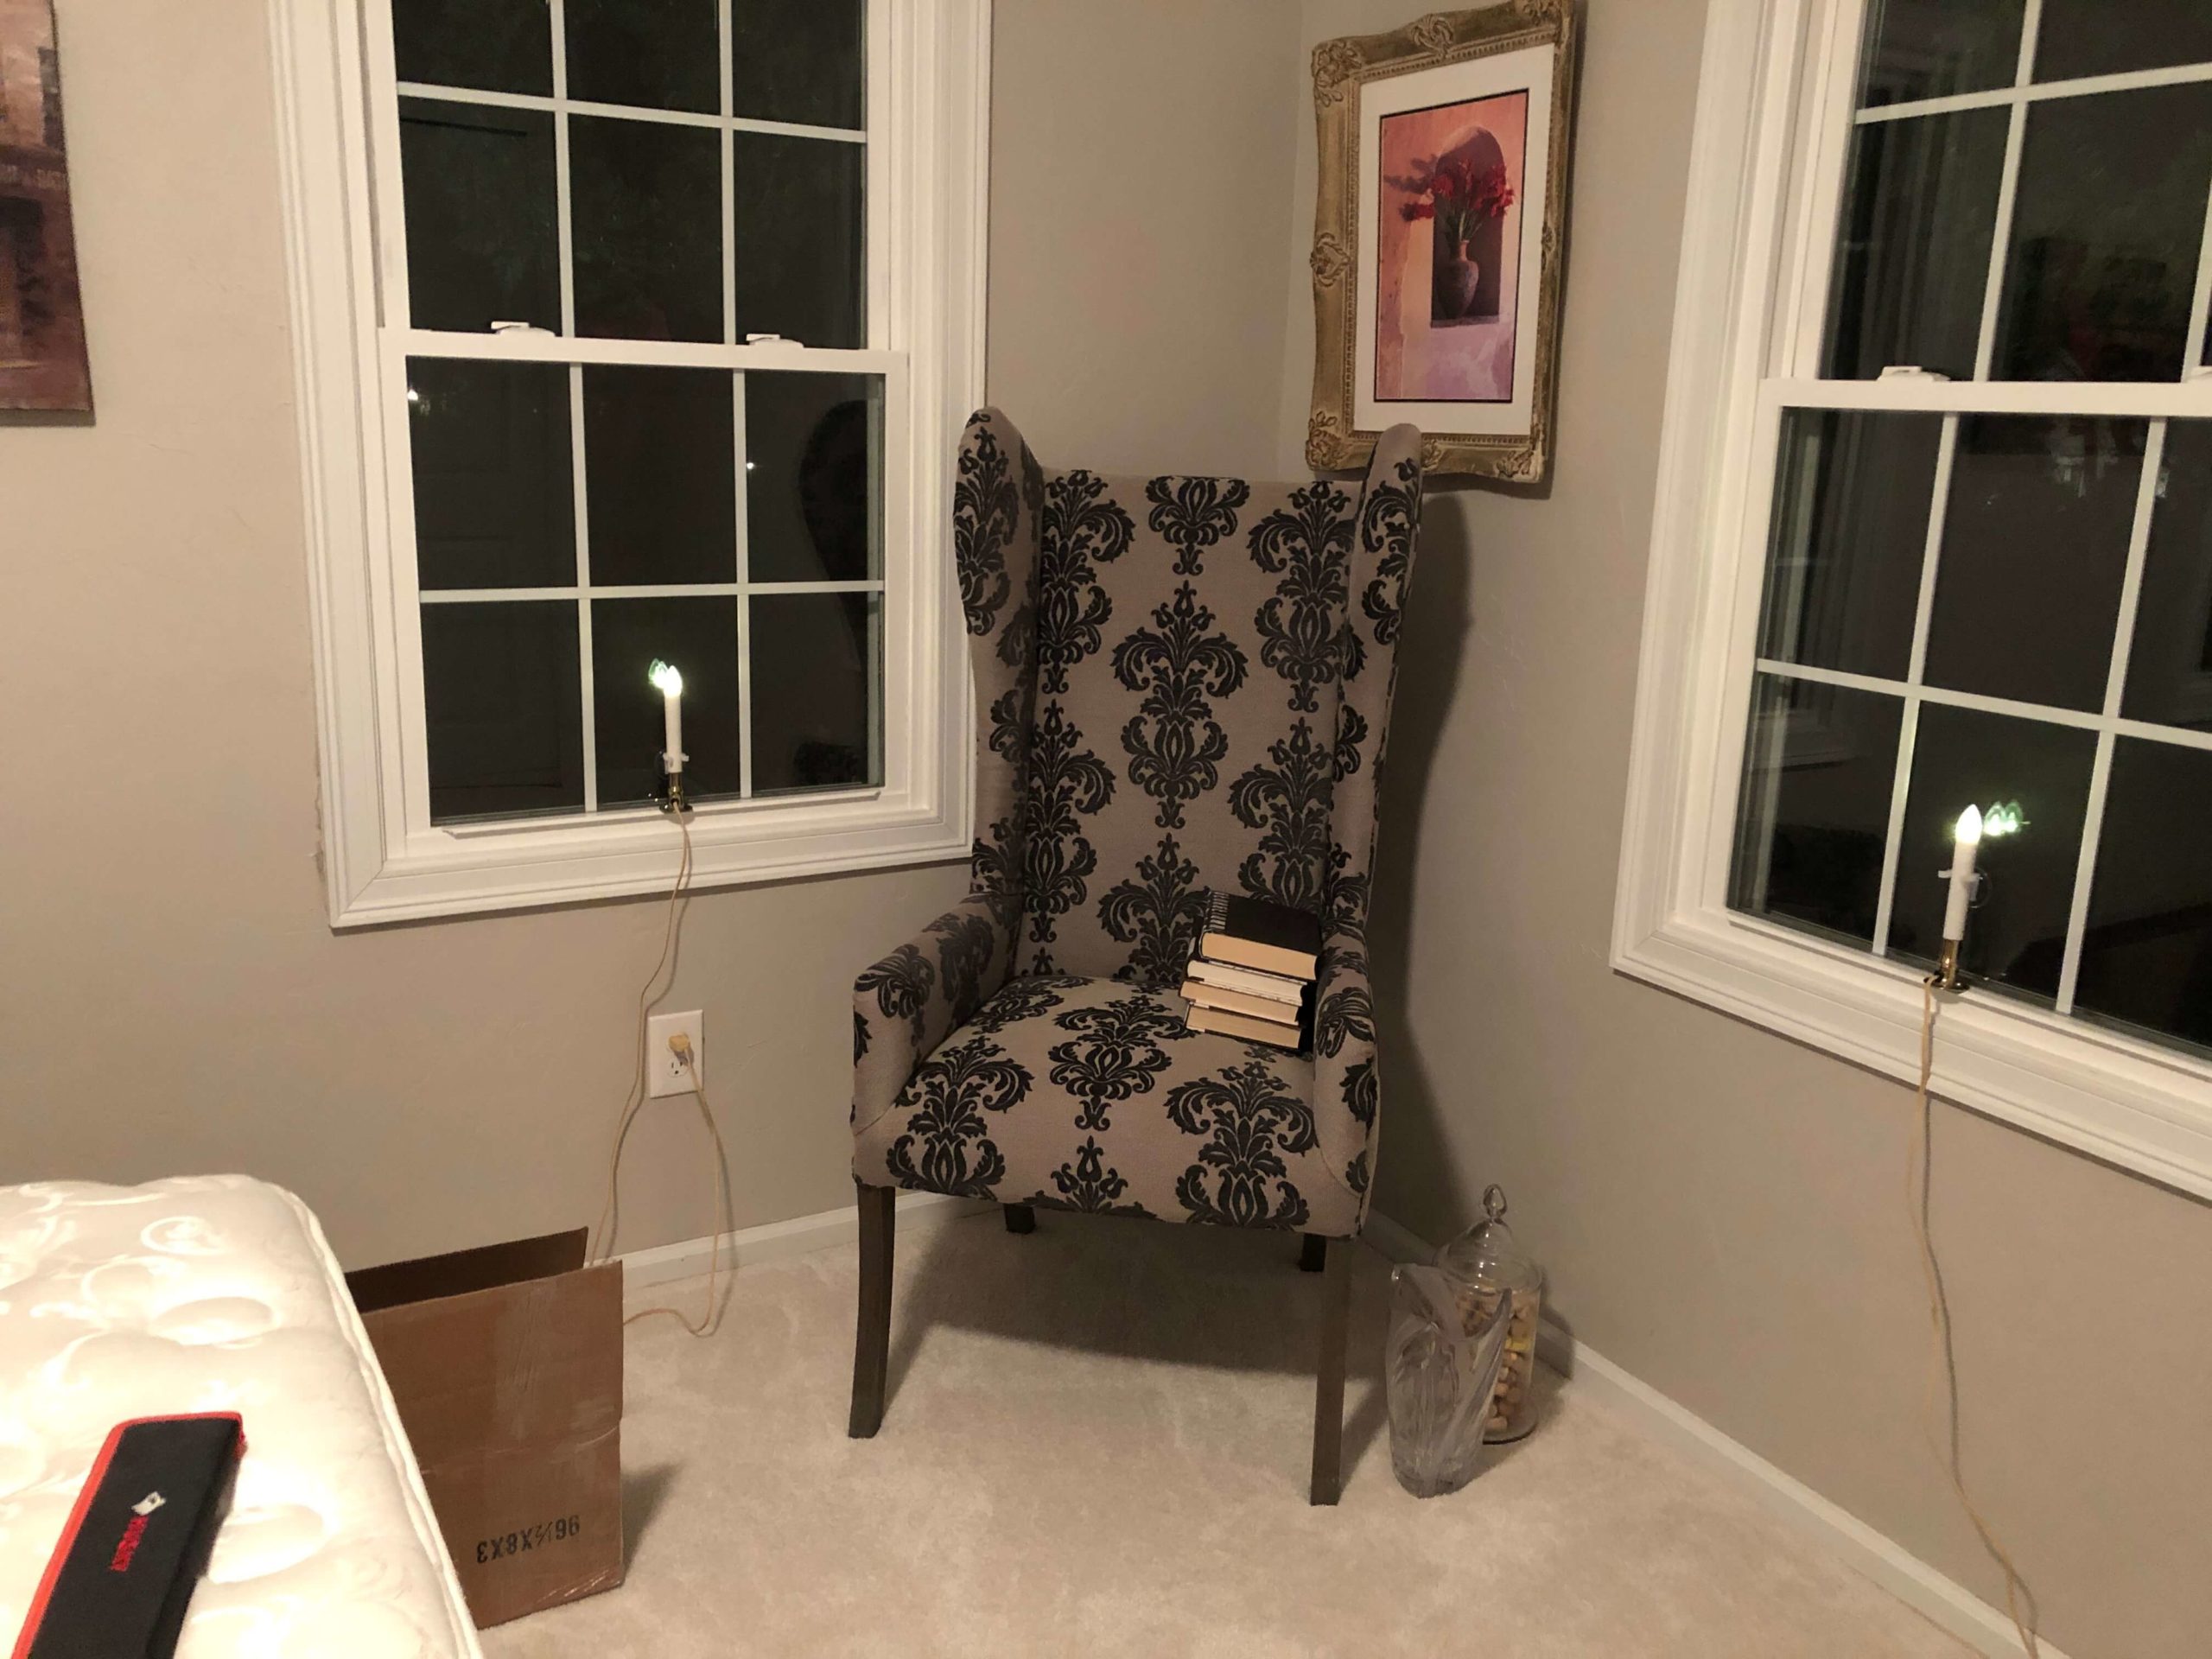 Wing Chair for Guest Bedroom Eclectic Interiors Hudson OH